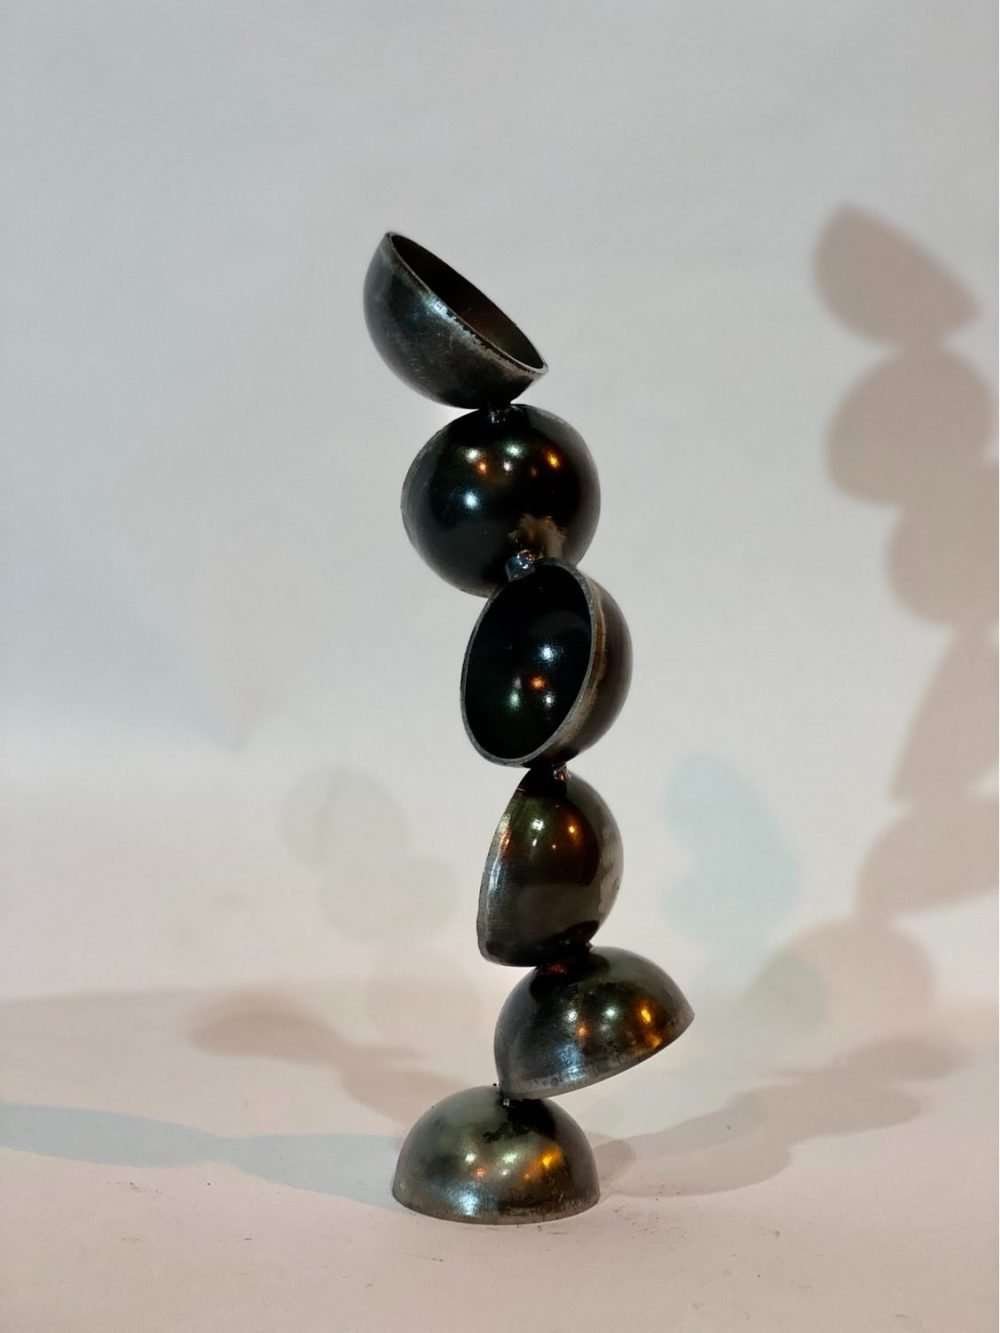 mirrored pearl sculpture on white background